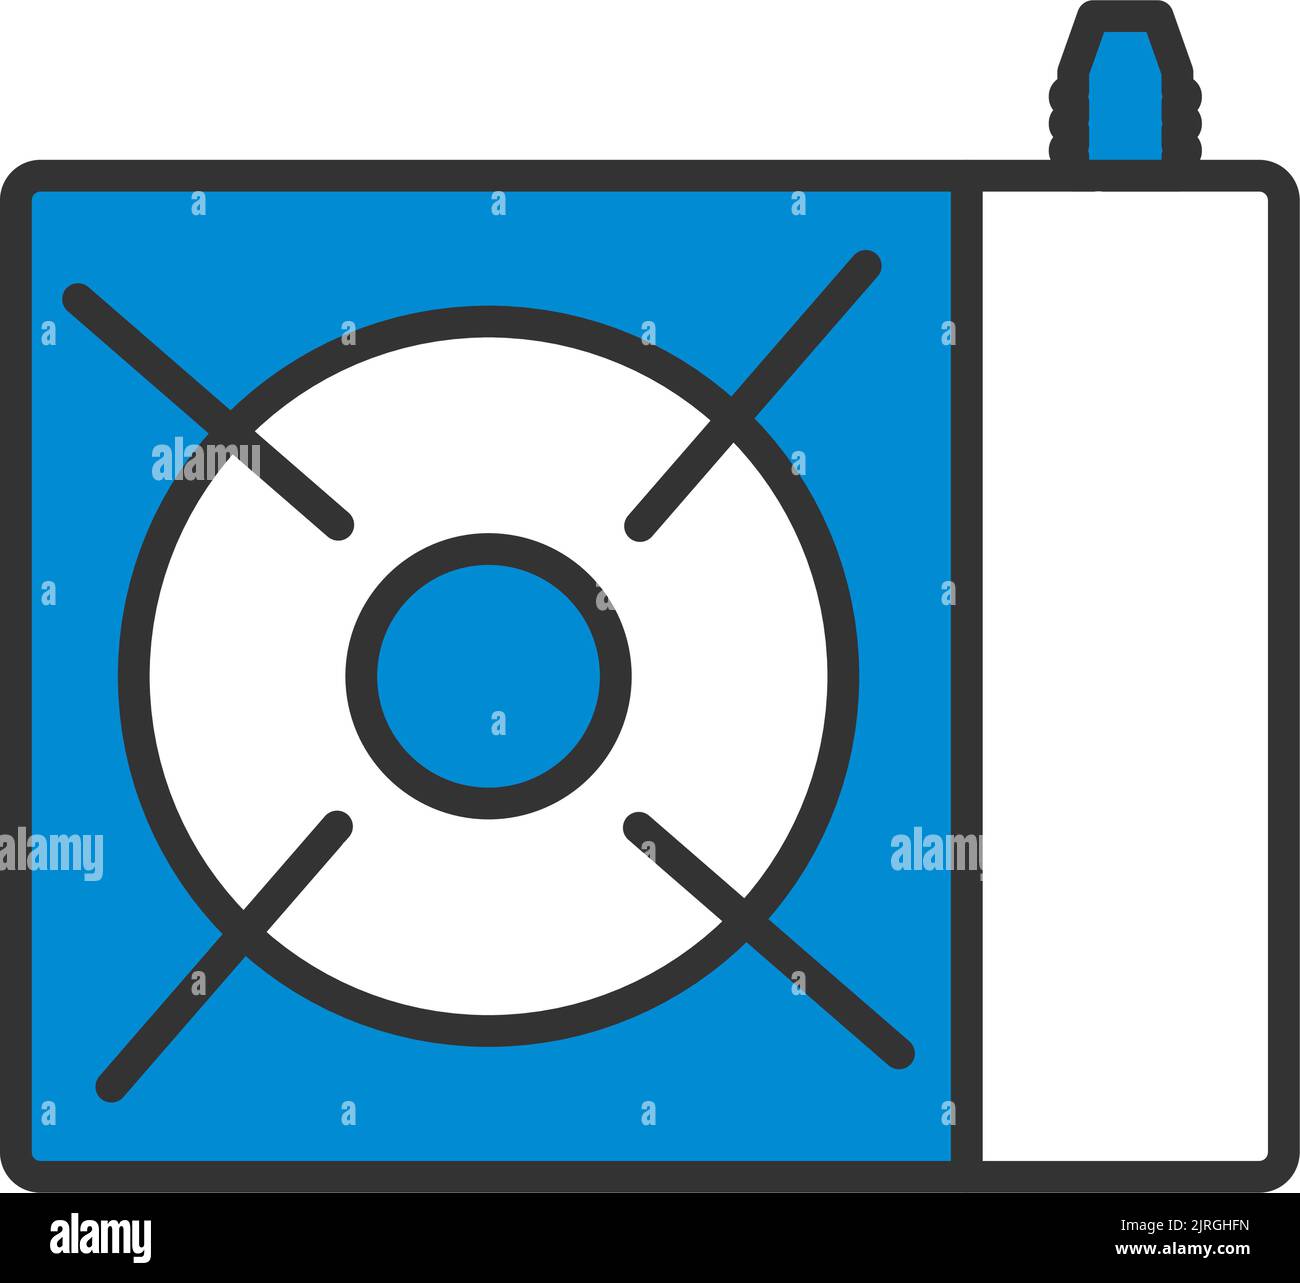 Icon Of Camping Gas Burner Stove. Editable Bold Outline With Color Fill Design. Vector Illustration. Stock Vector